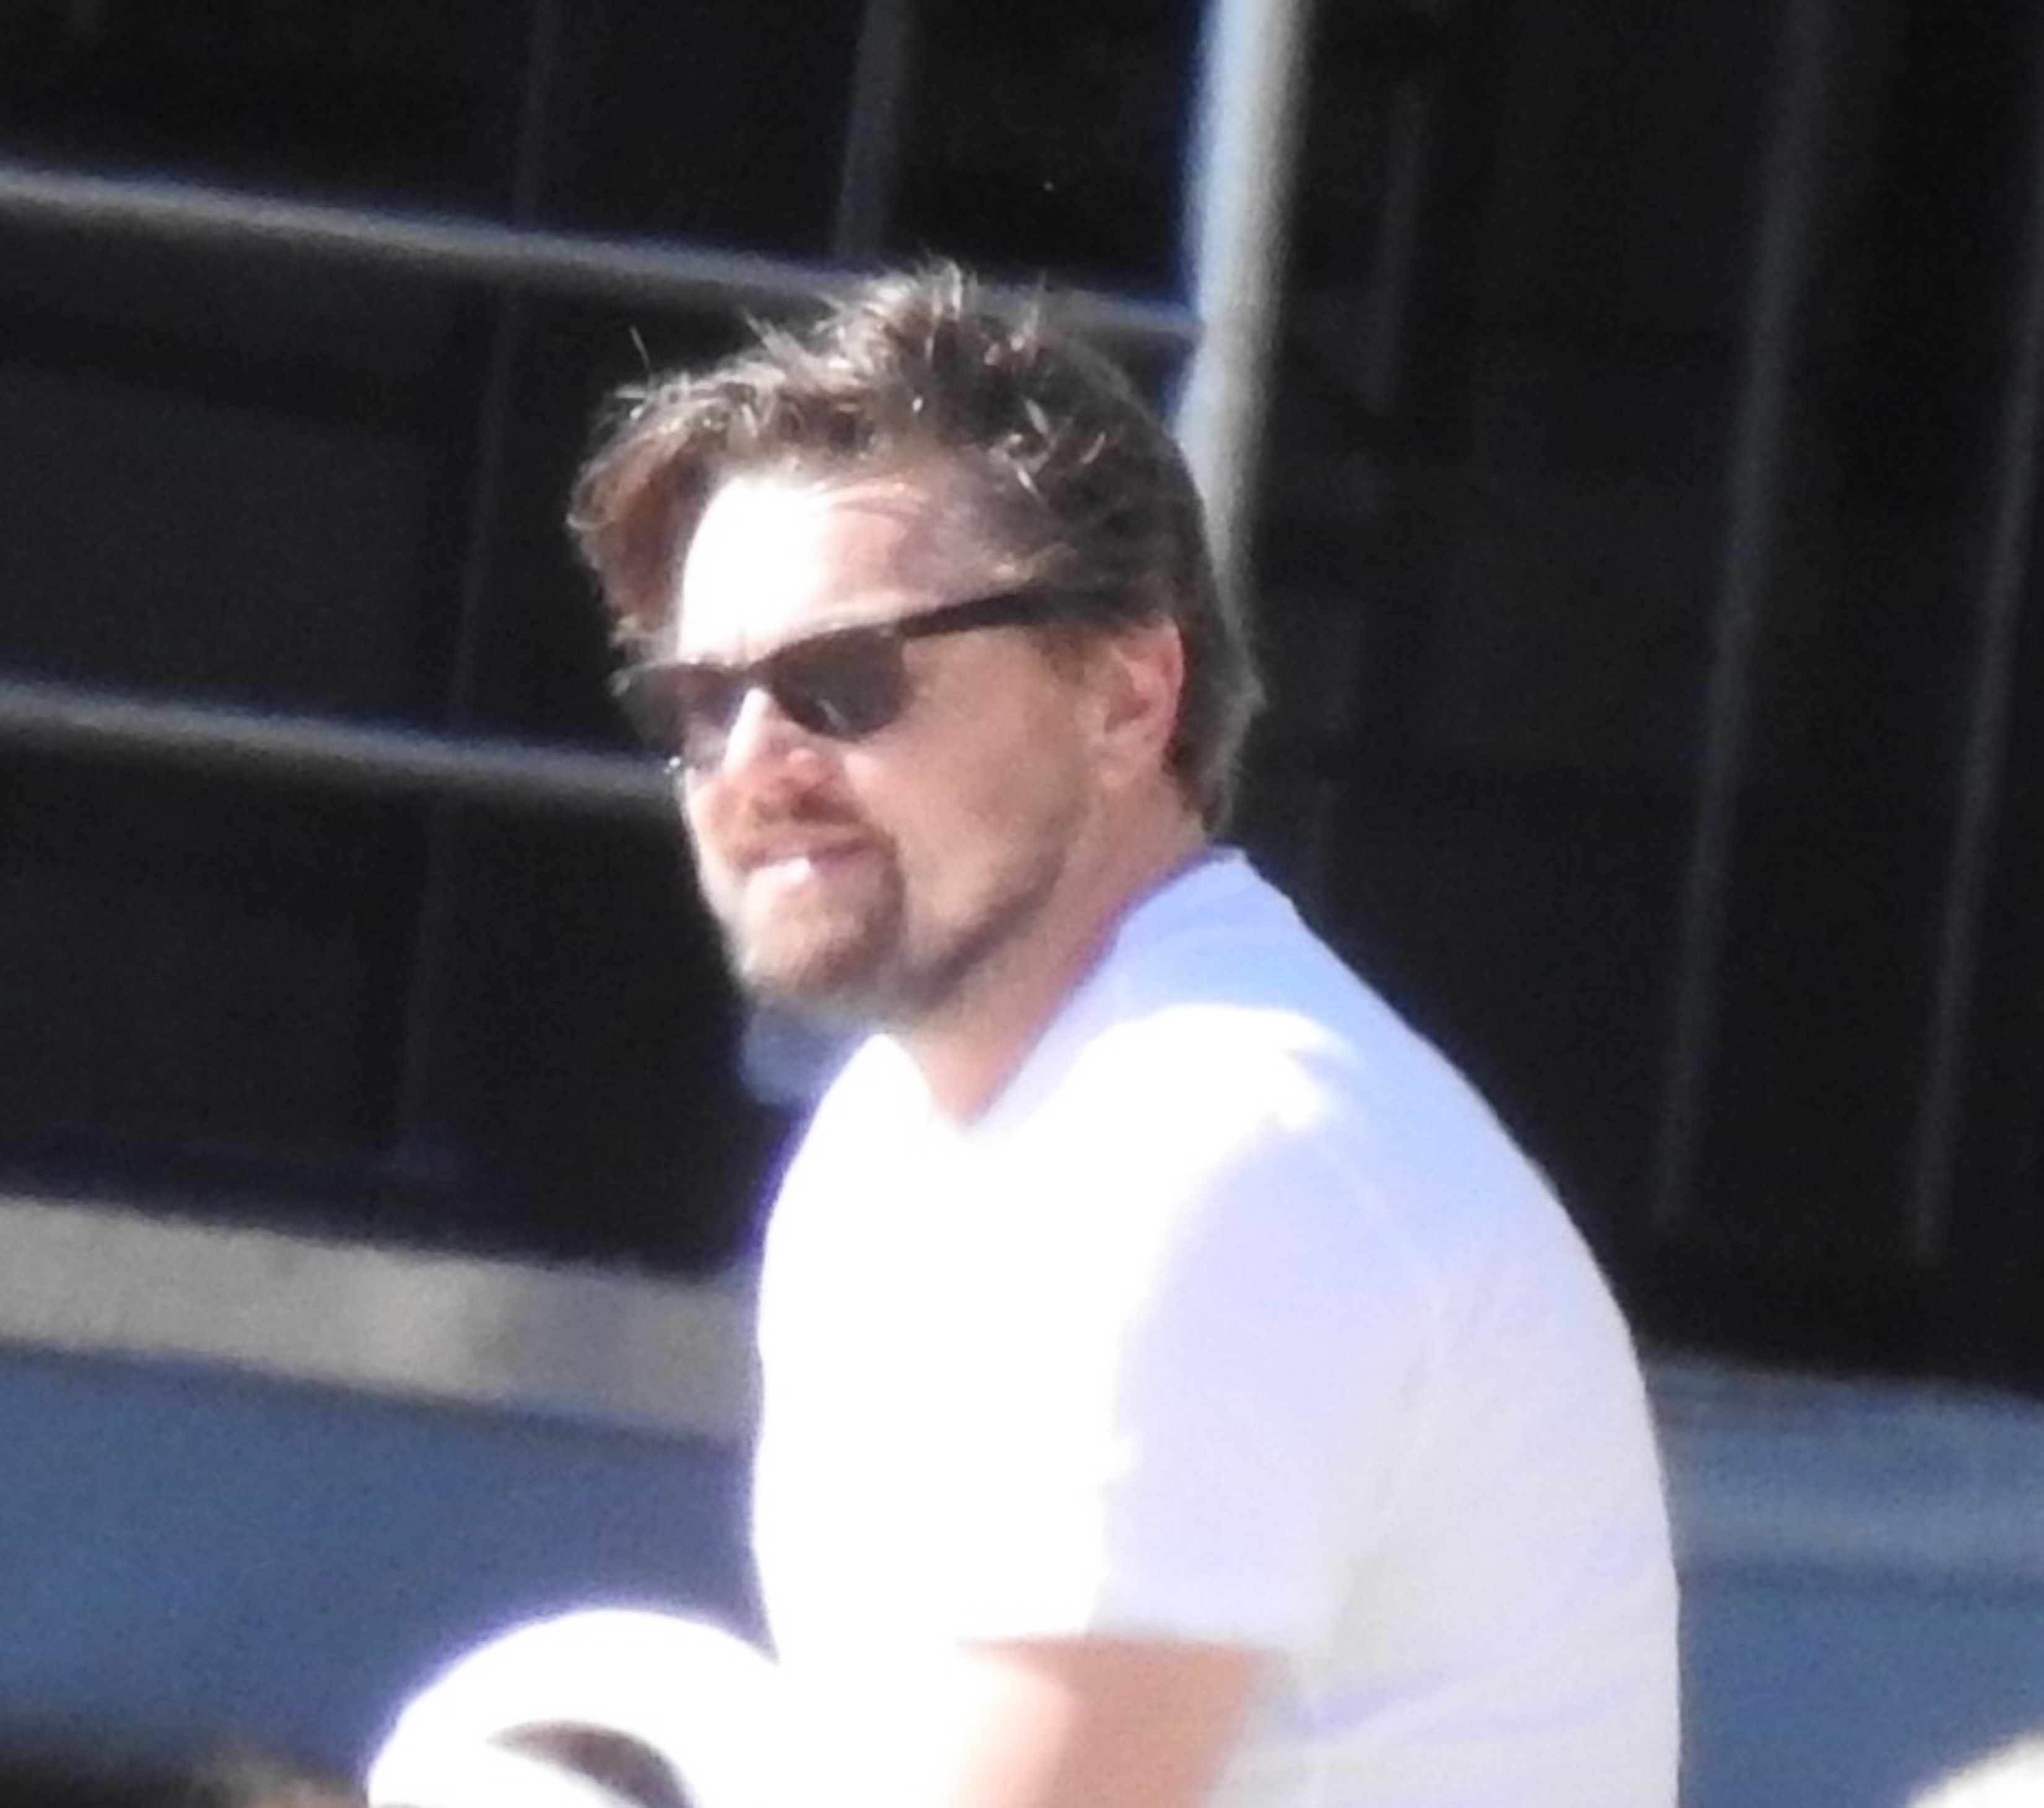 Leonardo DiCaprio hangs at the beach with friends.